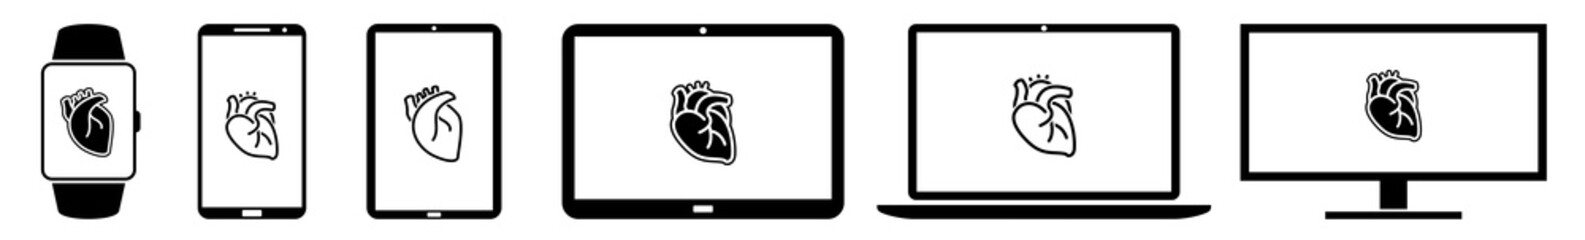 Display heart, cardiac, cardio, pathologic Icon Devices Set | Web Screen Device Online | Laptop Vector Illustration | Mobile Phone | PC Computer Smartphone Tablet Sign Isolated